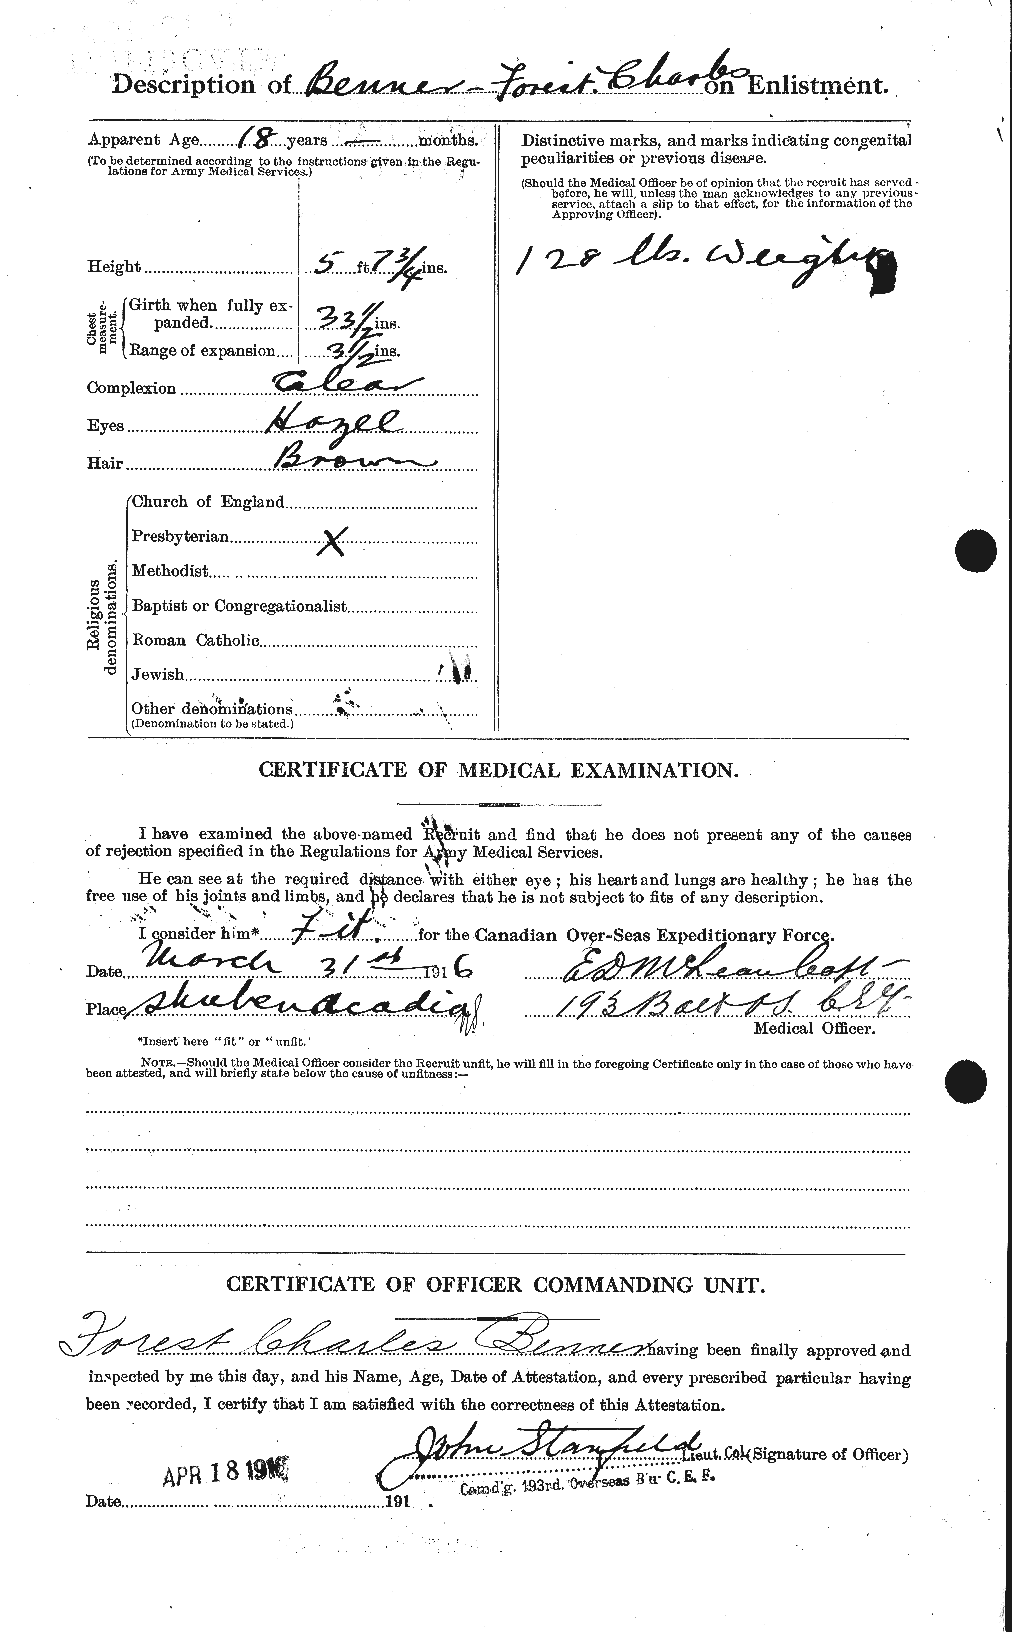 Personnel Records of the First World War - CEF 233238b